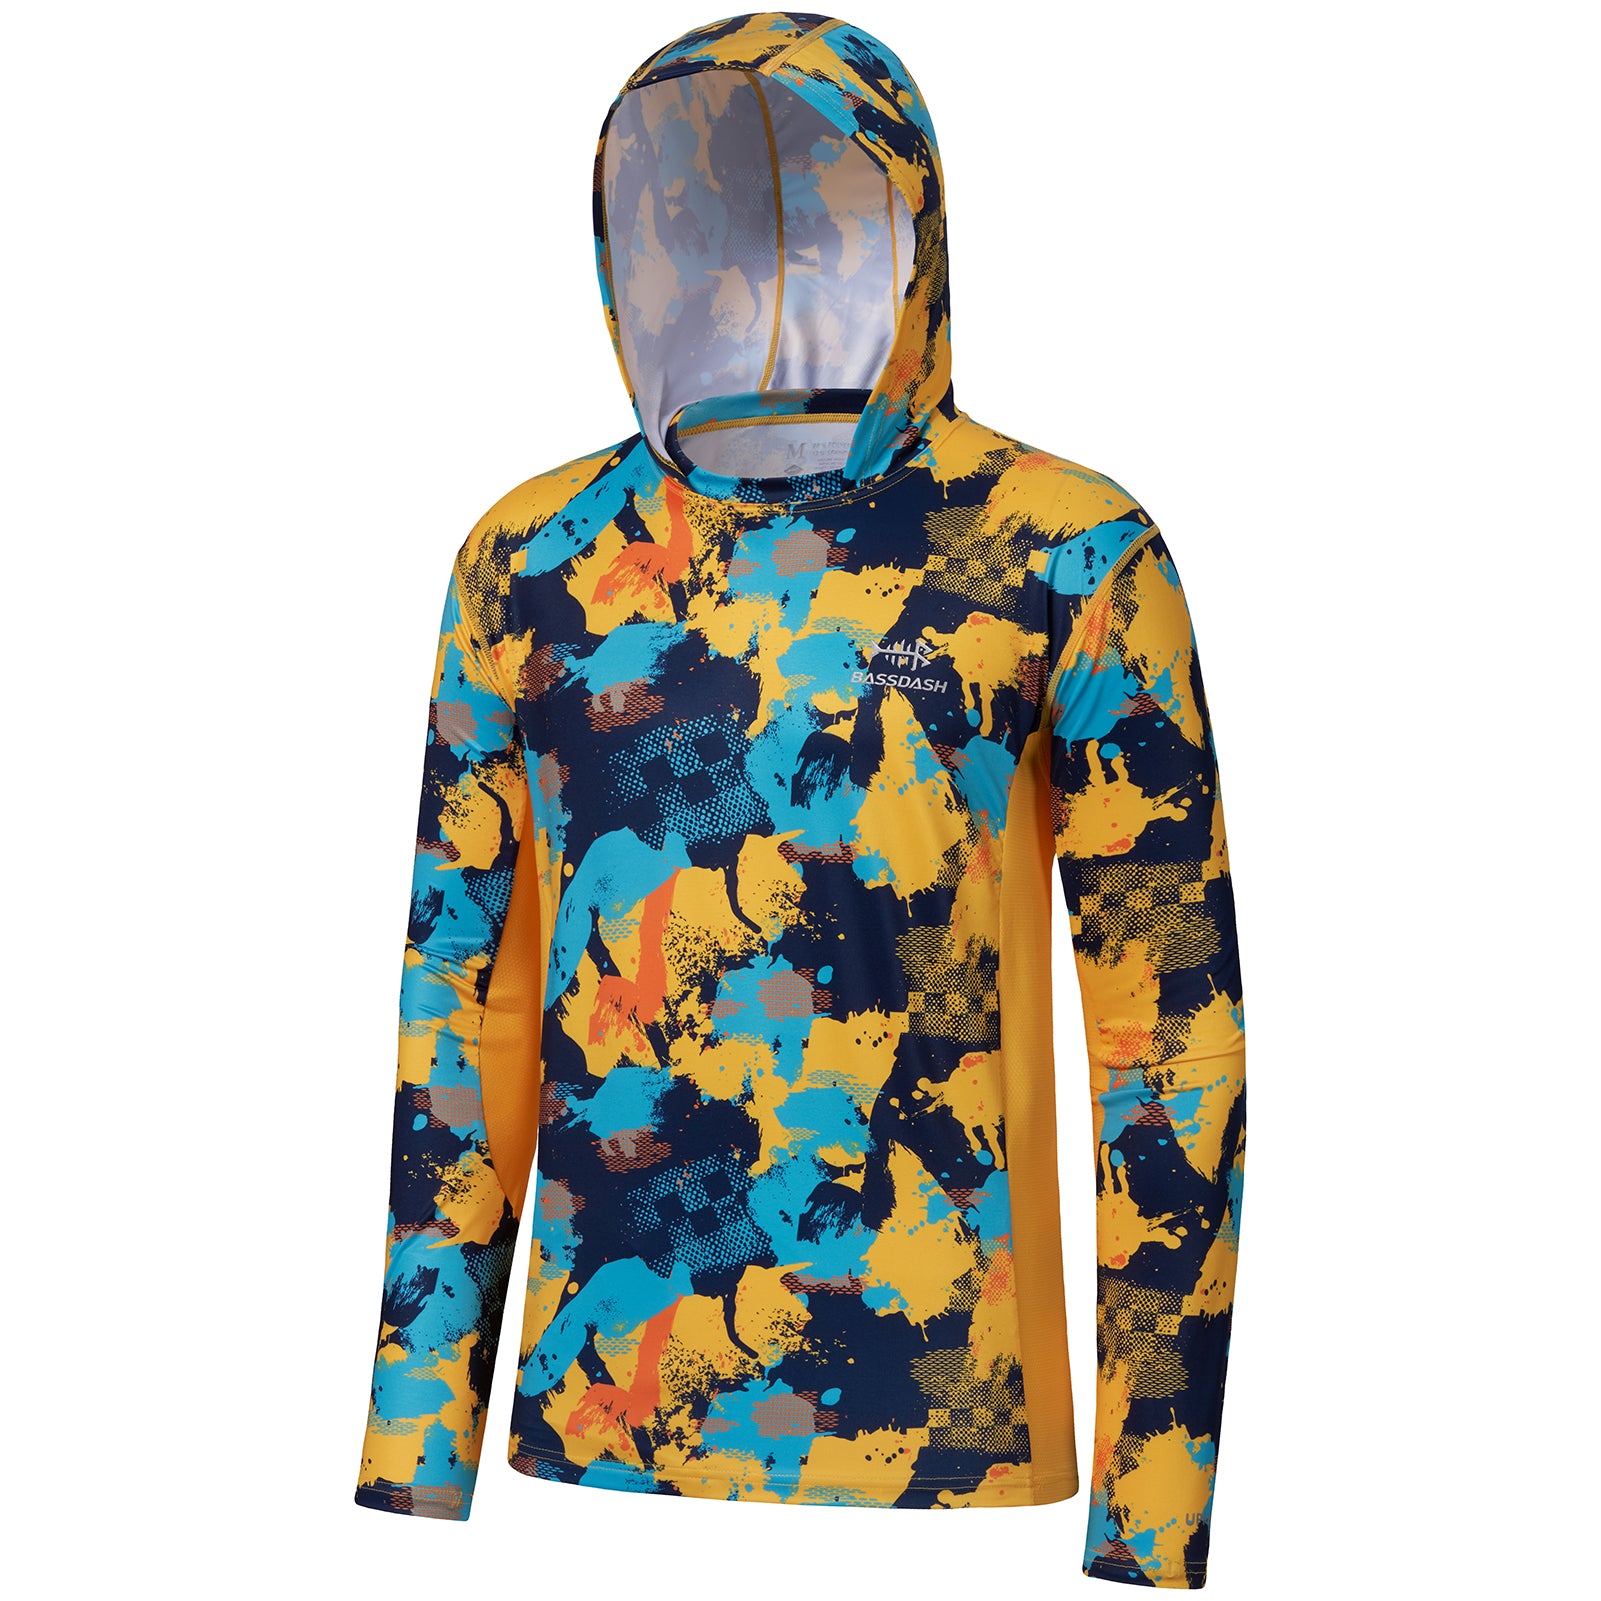 Men's UPF 50+ Camo Fishing Hoodie Shirts with Face Cover FS25M, Yellow/Blue Camo without neck gaiter / XX-Large